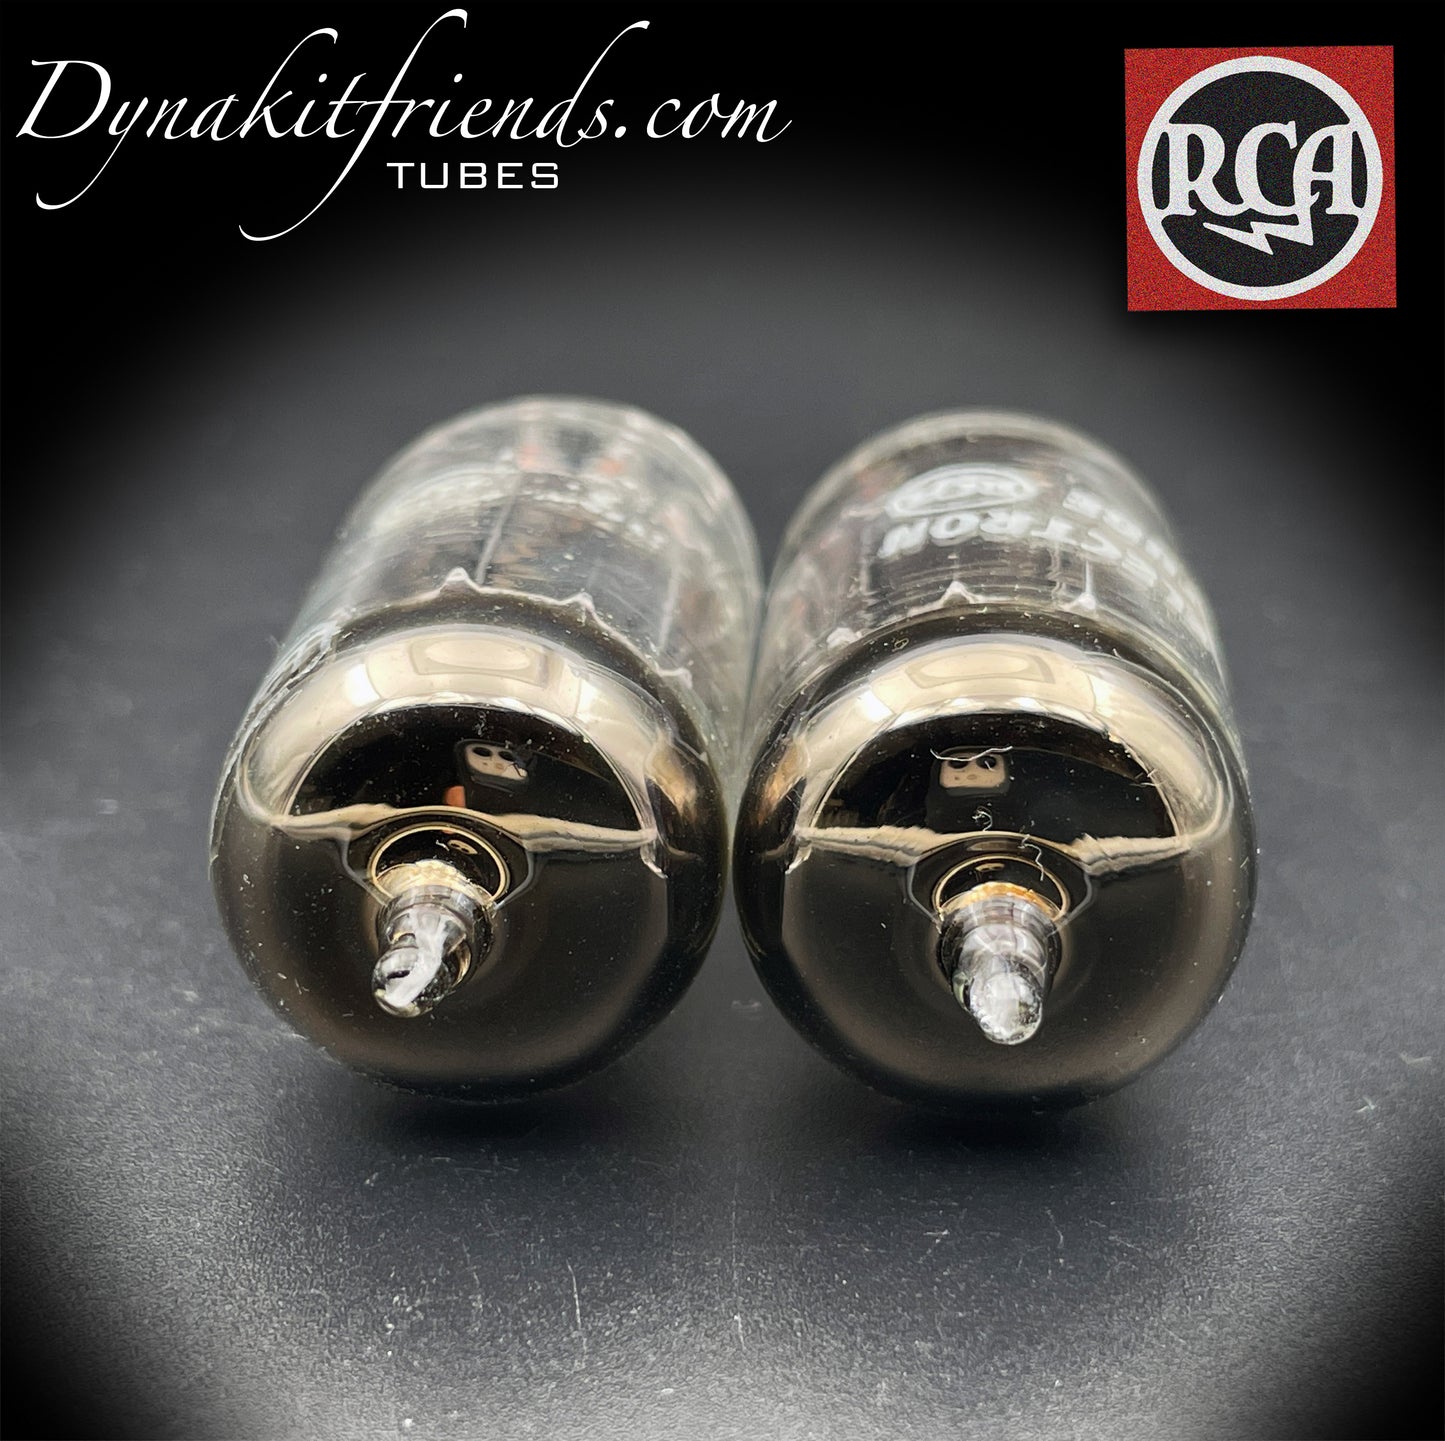 12AX7 ( ECC83 ) RCA Long Black Plates [] Tilted Getter Matched Tubes MADE IN USA '50s